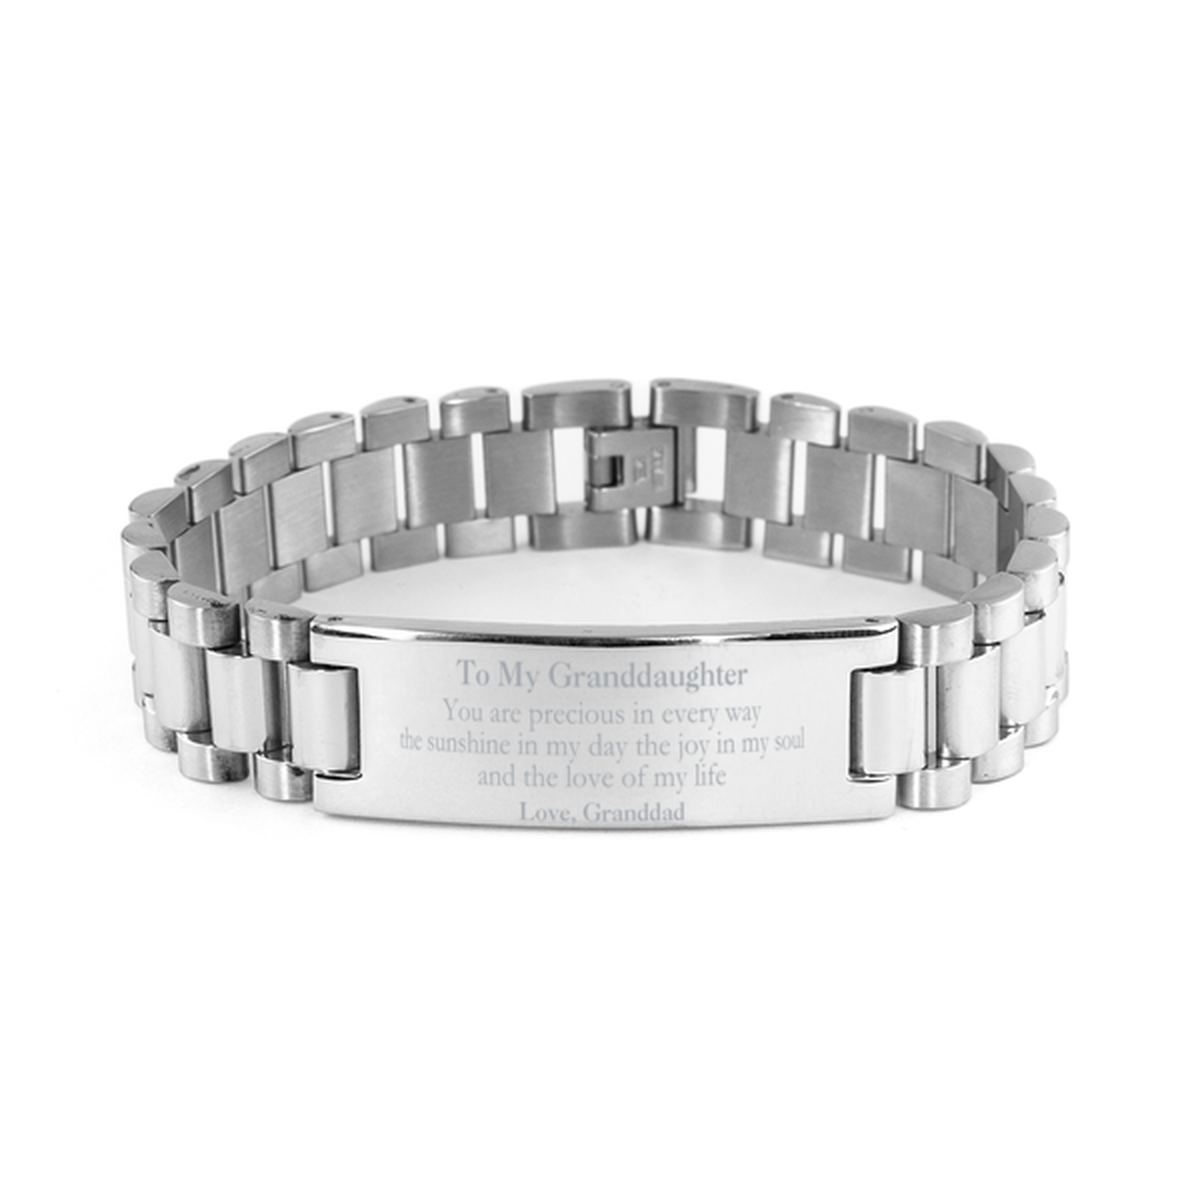 Graduation Gifts for Granddaughter Ladder Stainless Steel Bracelet Present from Granddad, Christmas Granddaughter Birthday Gifts Granddaughter You are precious in every way the sunshine in my day. Love, Granddad